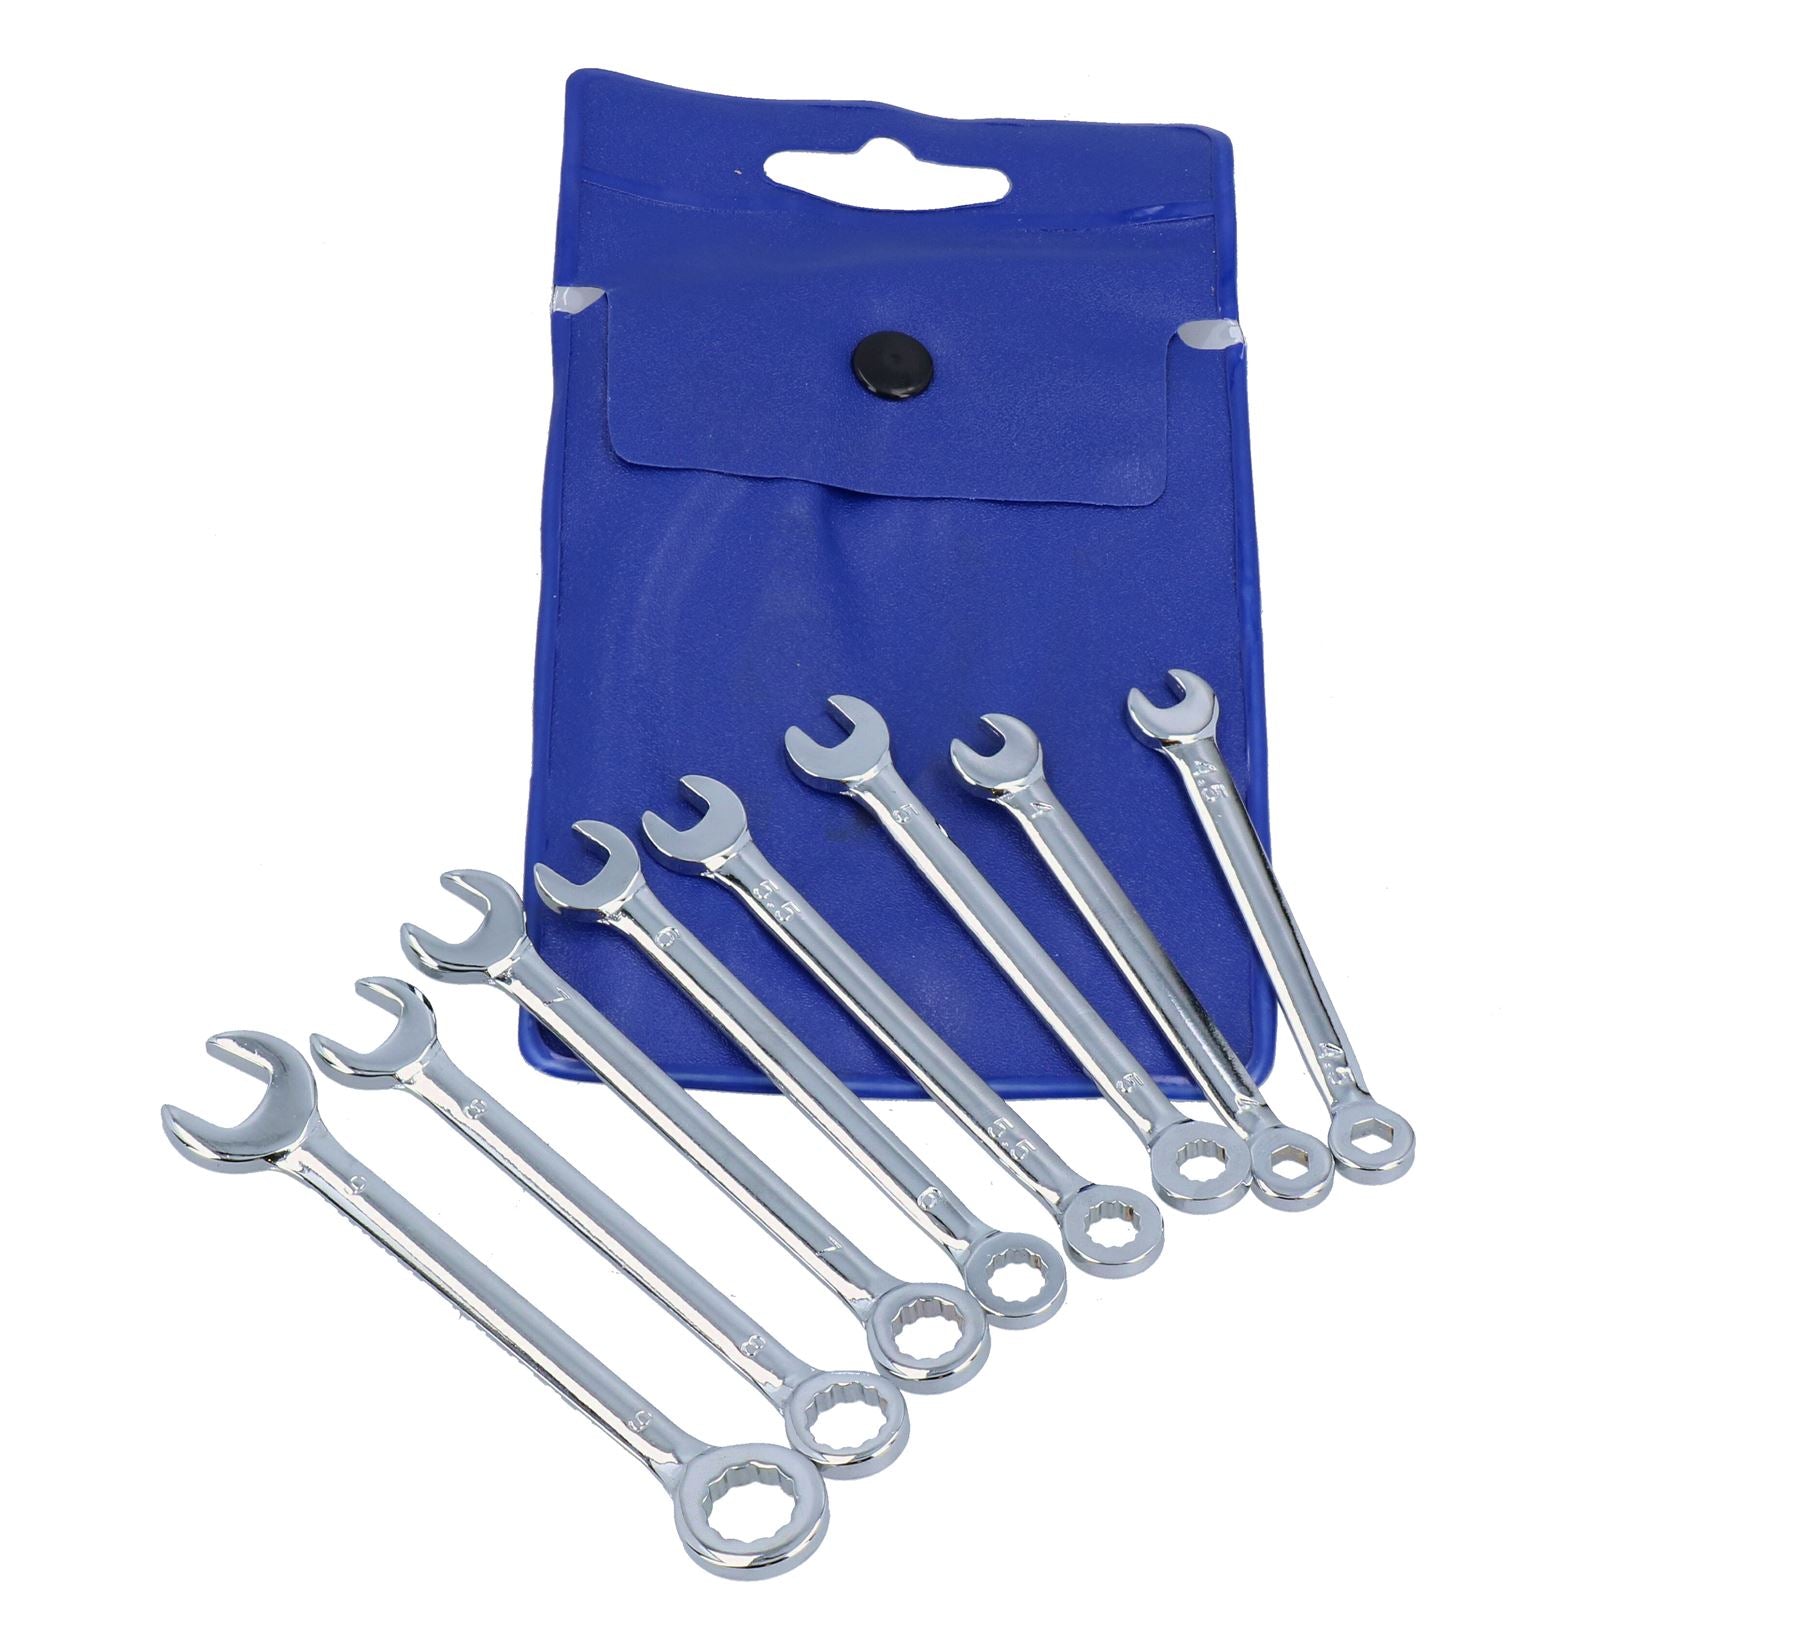 8pc Mini Metric MM Stubby Combination Spanners Wrenches 4mm – 9mm